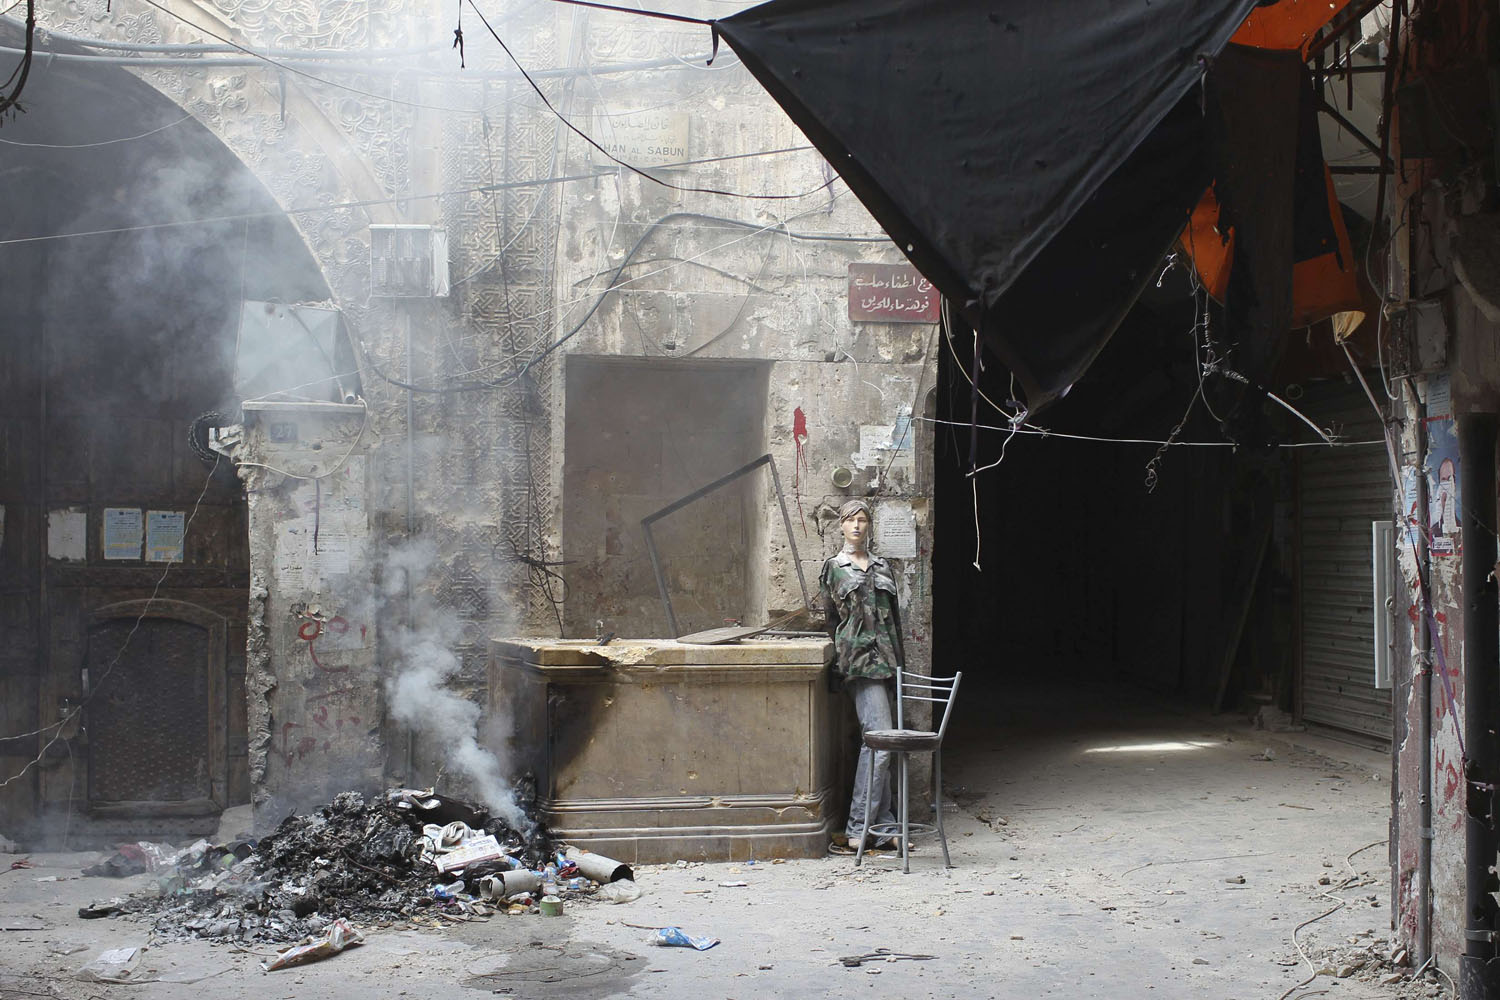 Image: Nov. 2, 2012. A mannequin used by the Free Syrian Army as a decoy is seen in an area where clashes continue with pro-government forces in the Old Town of Aleppo.